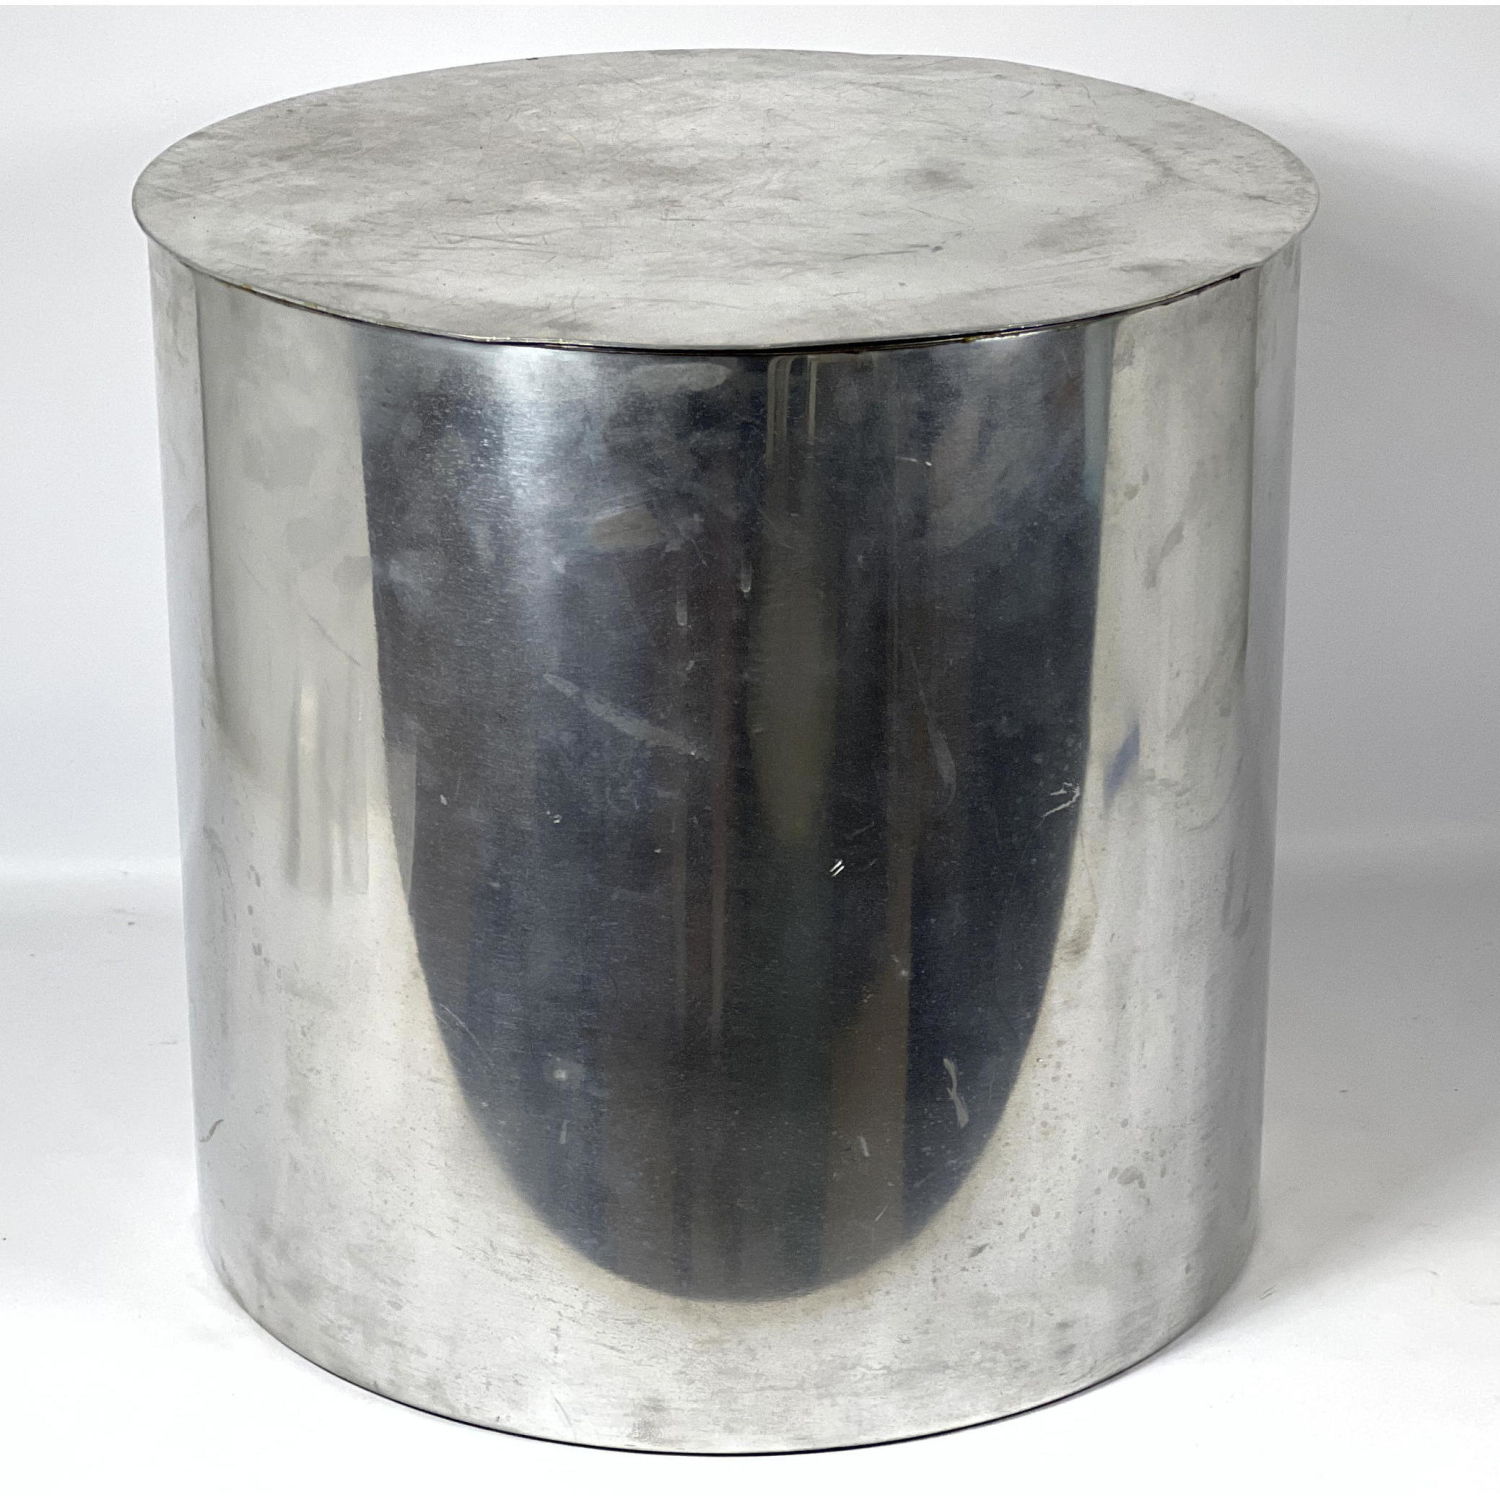 Aluminum cylindrical side table  3ad539